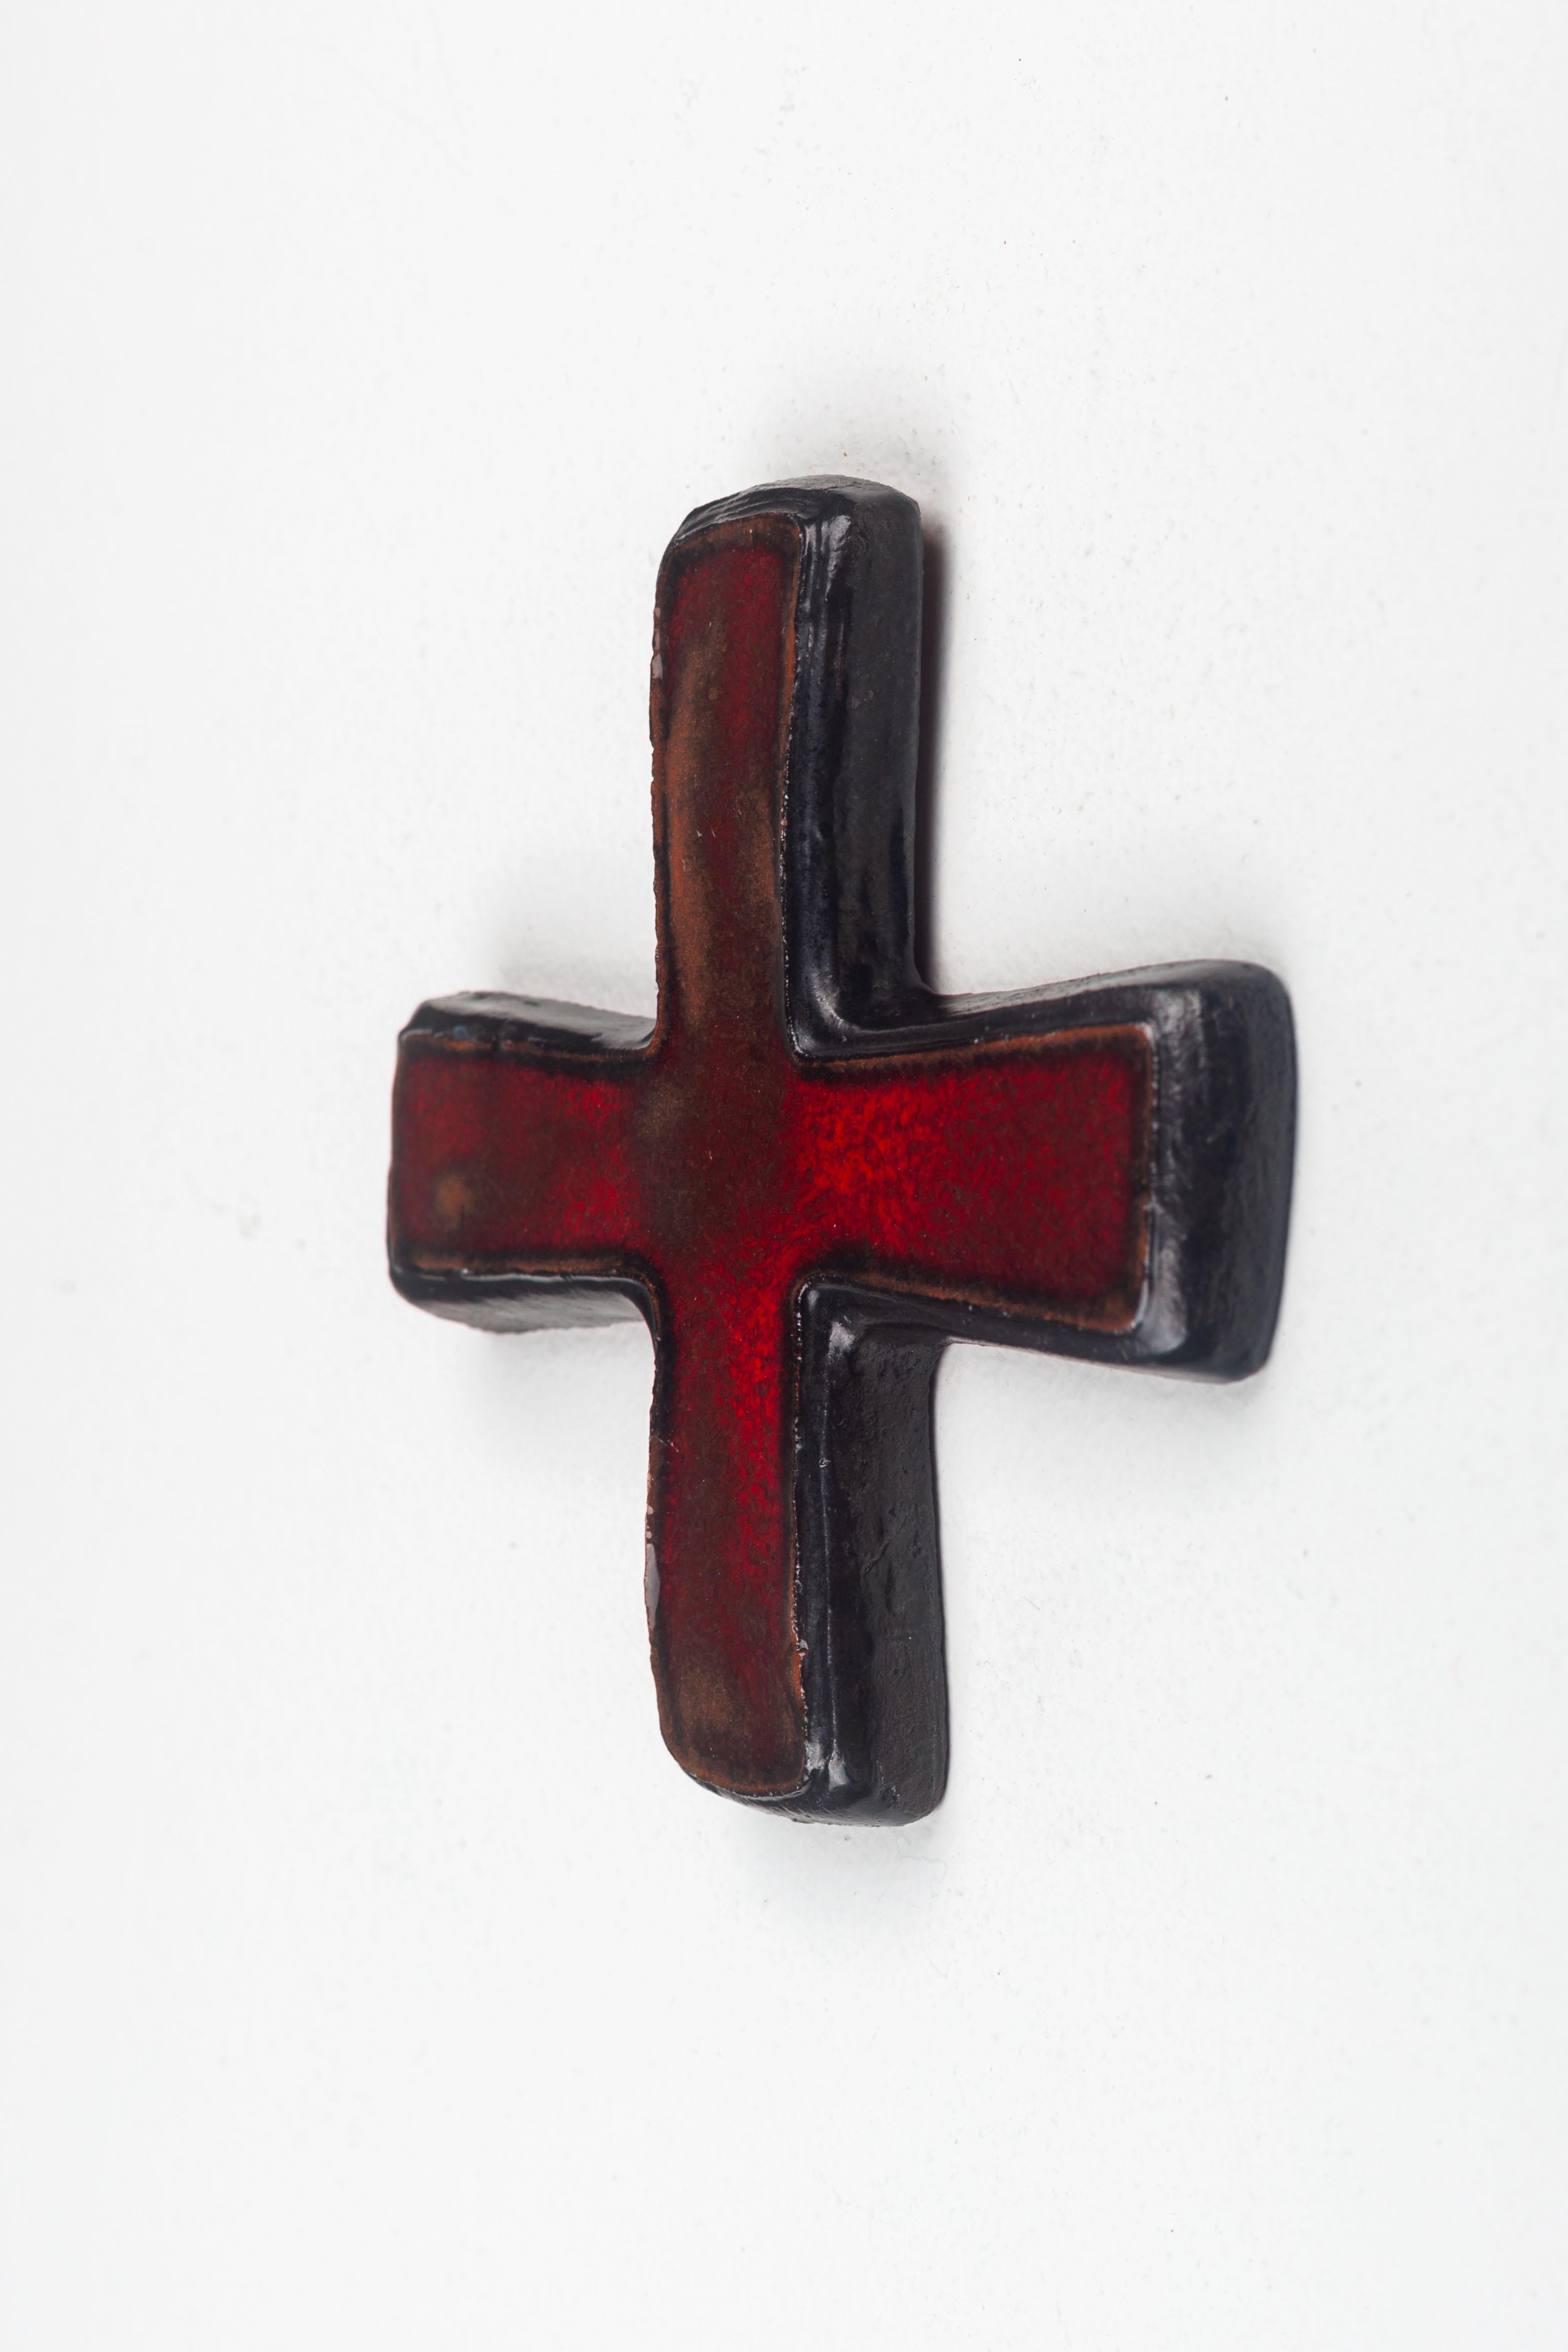 This ceramic cross is a quintessential representation of mid-century modern design, realized by a skilled European studio pottery artist. The cross features a simplistic yet profound silhouette, embodying the minimalist ethos that was prevalent